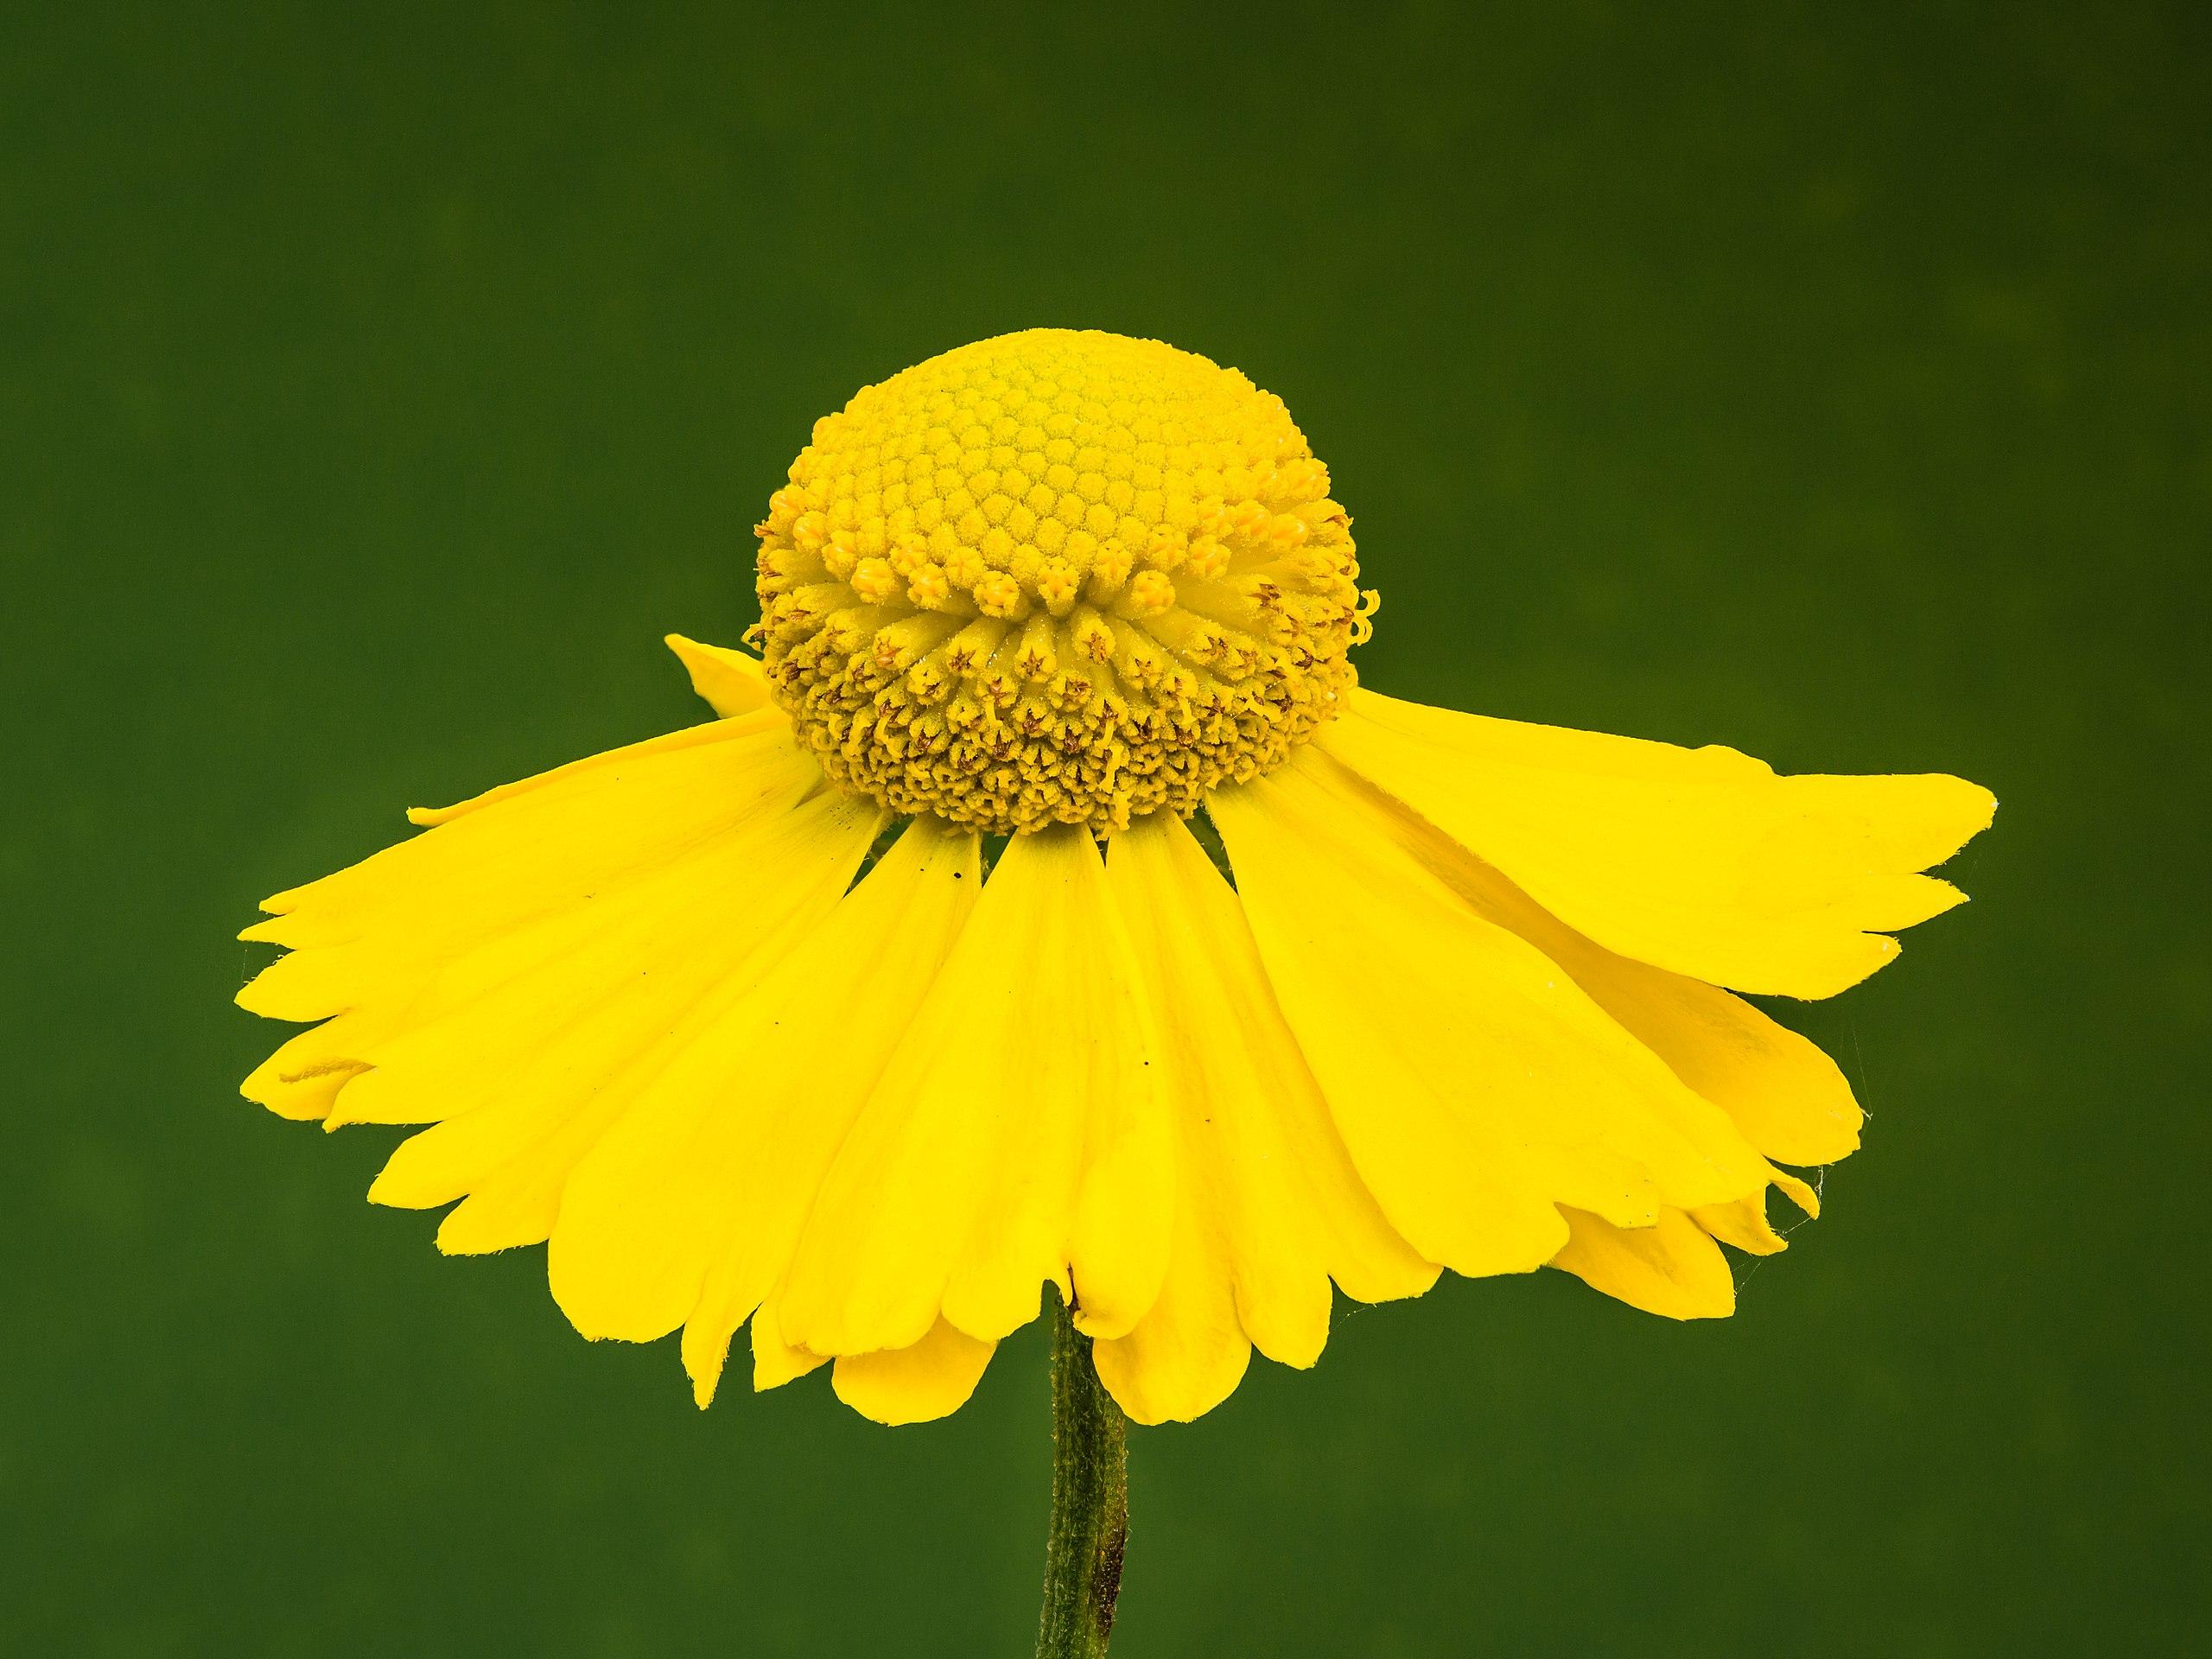 Yellow flower with yellow anthers and dark-green stem.